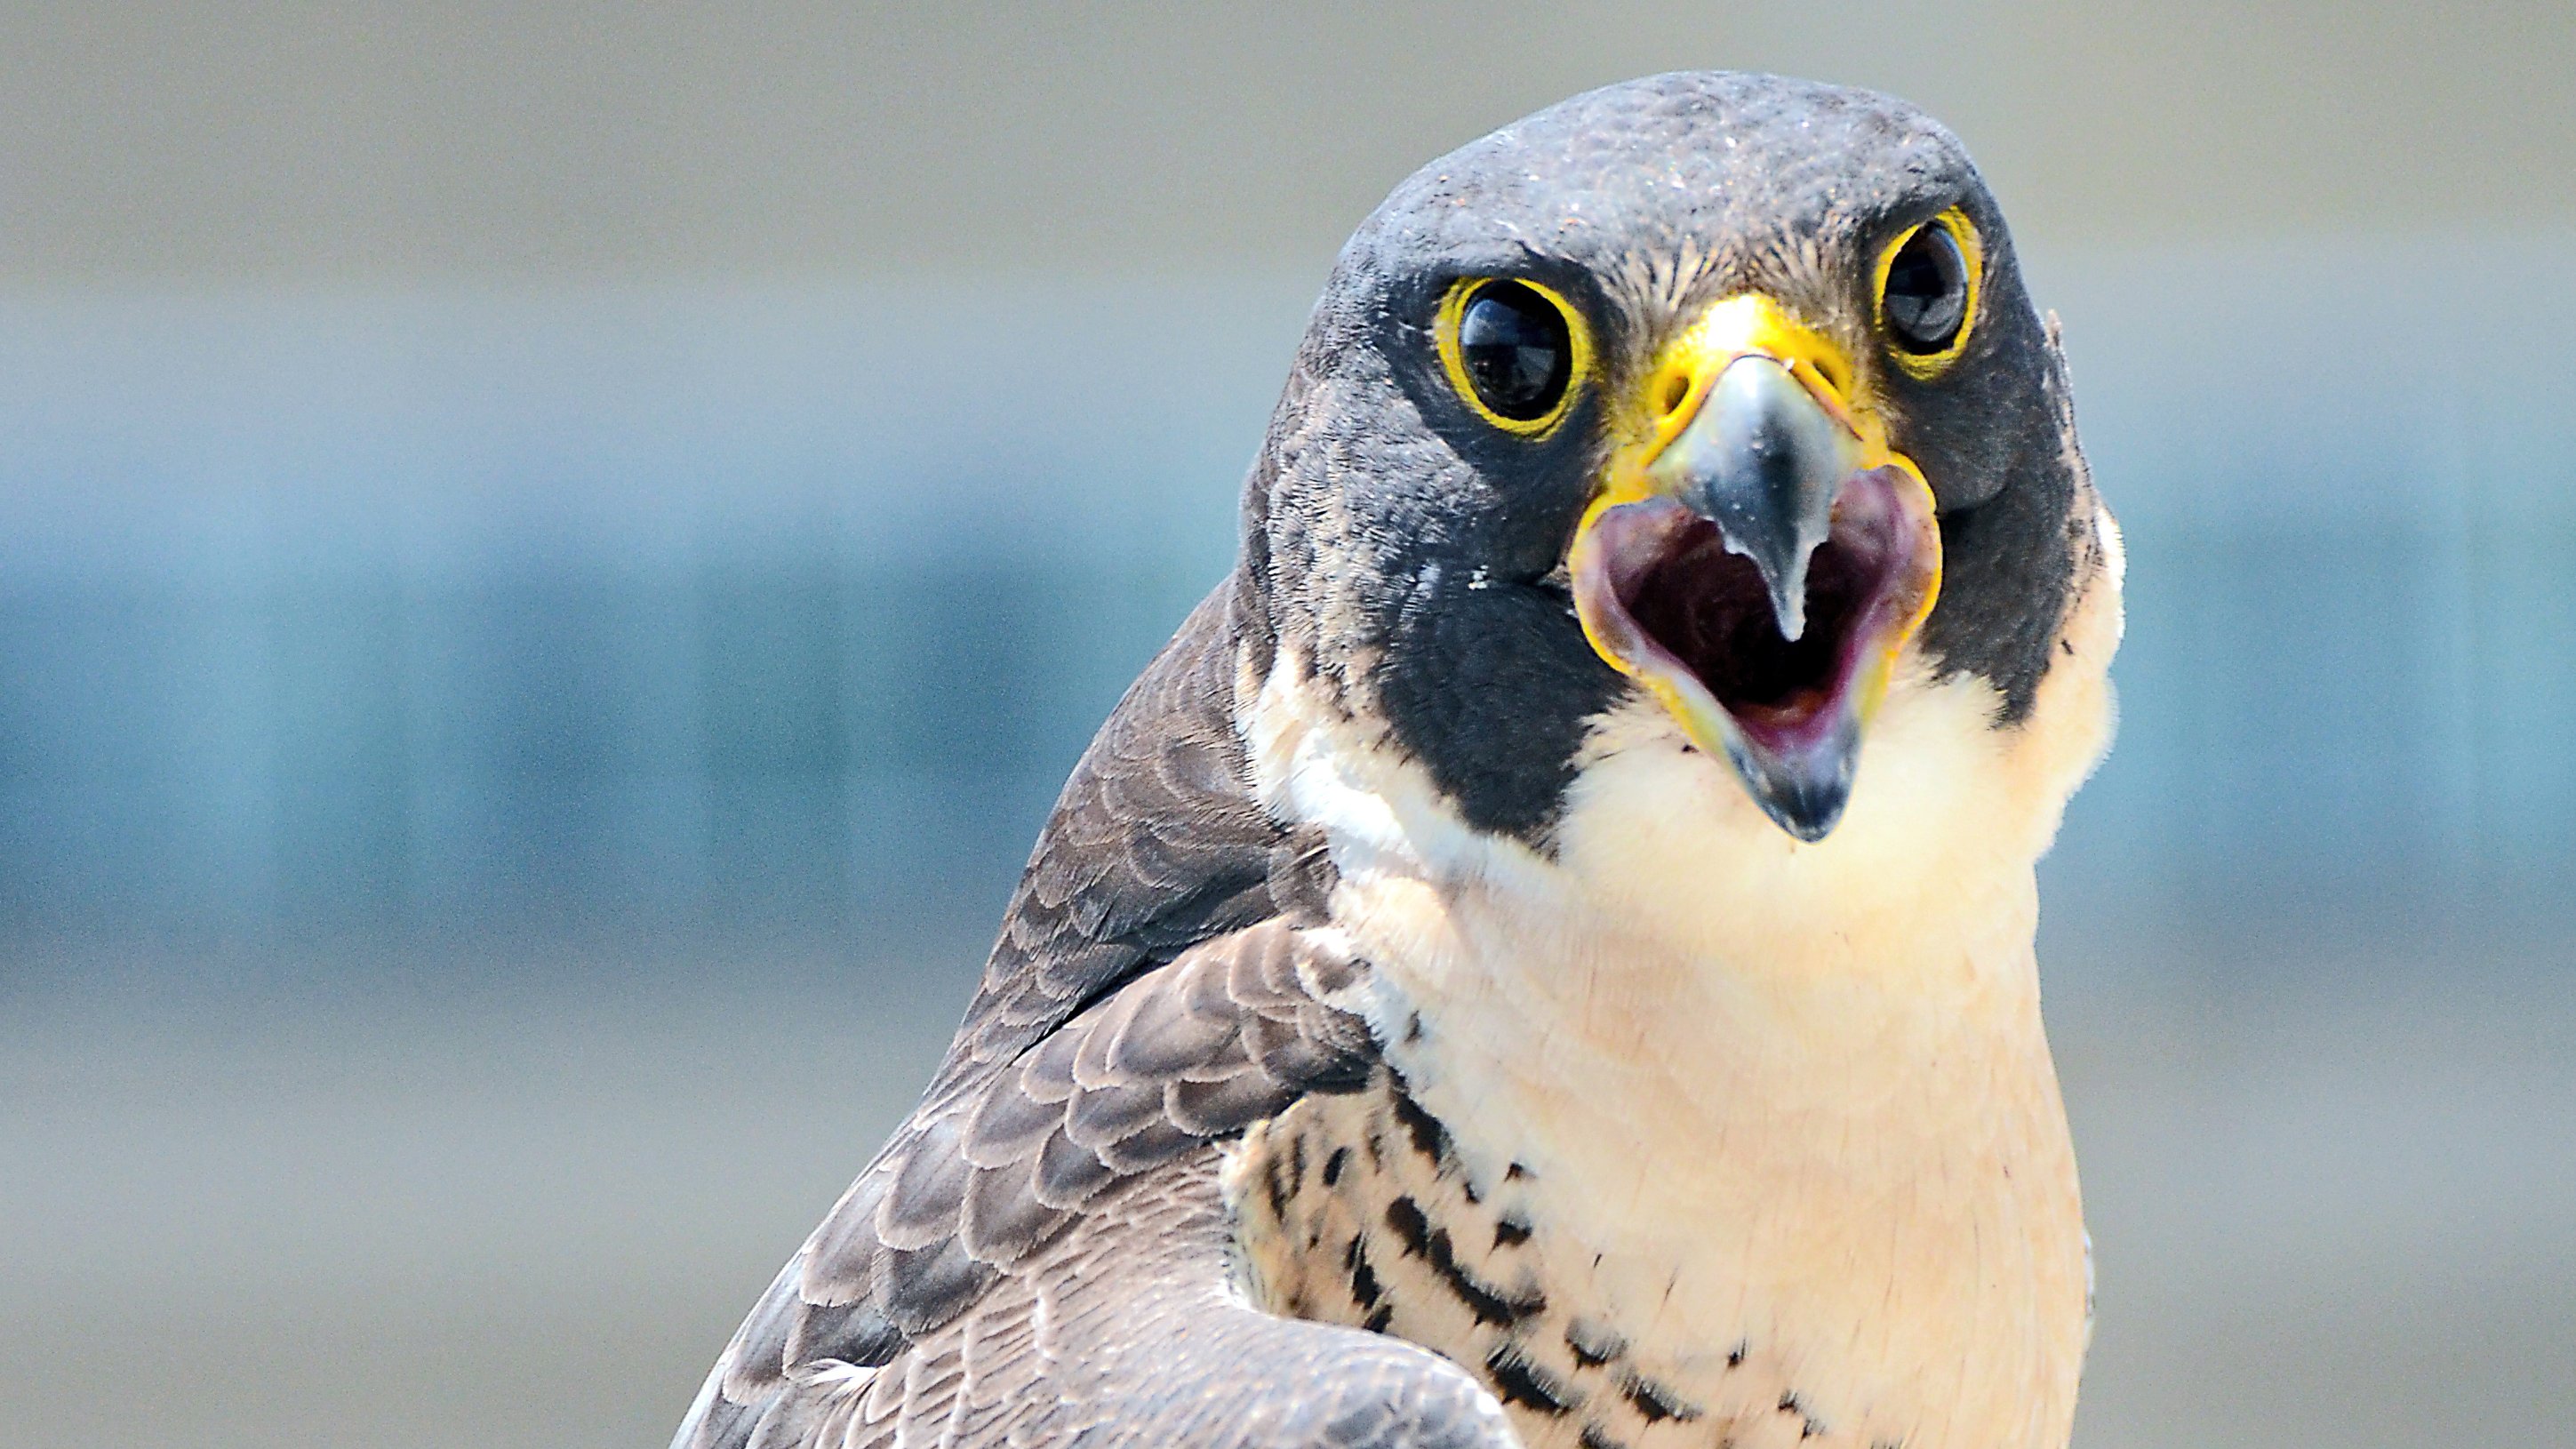 reductor Litteratur at lege Falcon Chatter on Twitter: "DYK? When stooping, or dropping on prey with  closed wings, peregrine falcons can achieve speeds of over 200 mph. That's  approximately 50 mph faster than the top speed